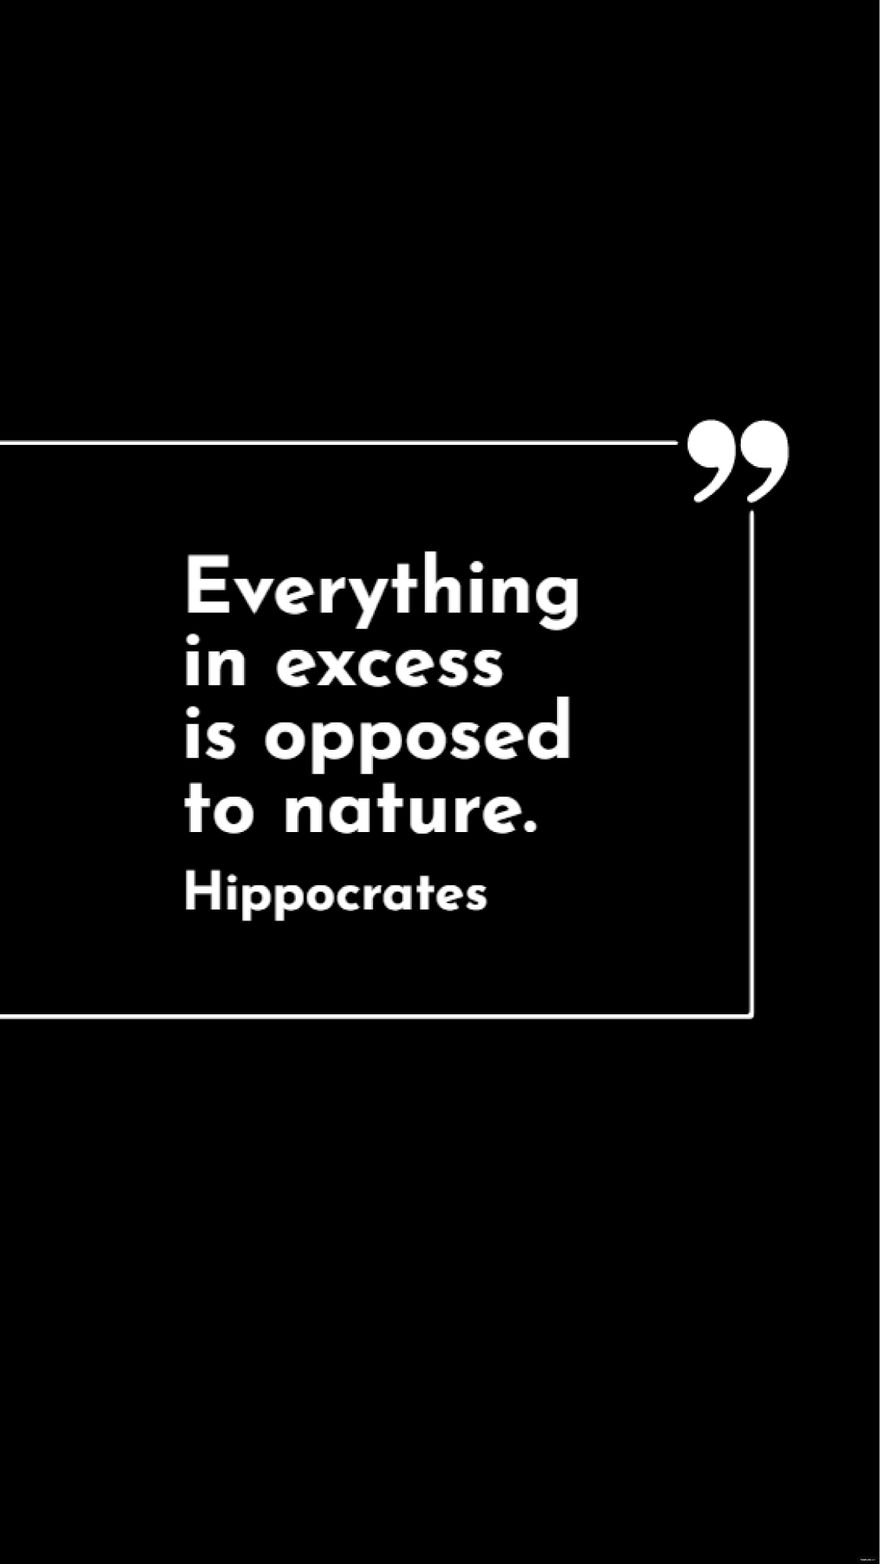 Free Hippocrates - Everything in excess is opposed to nature. in JPG